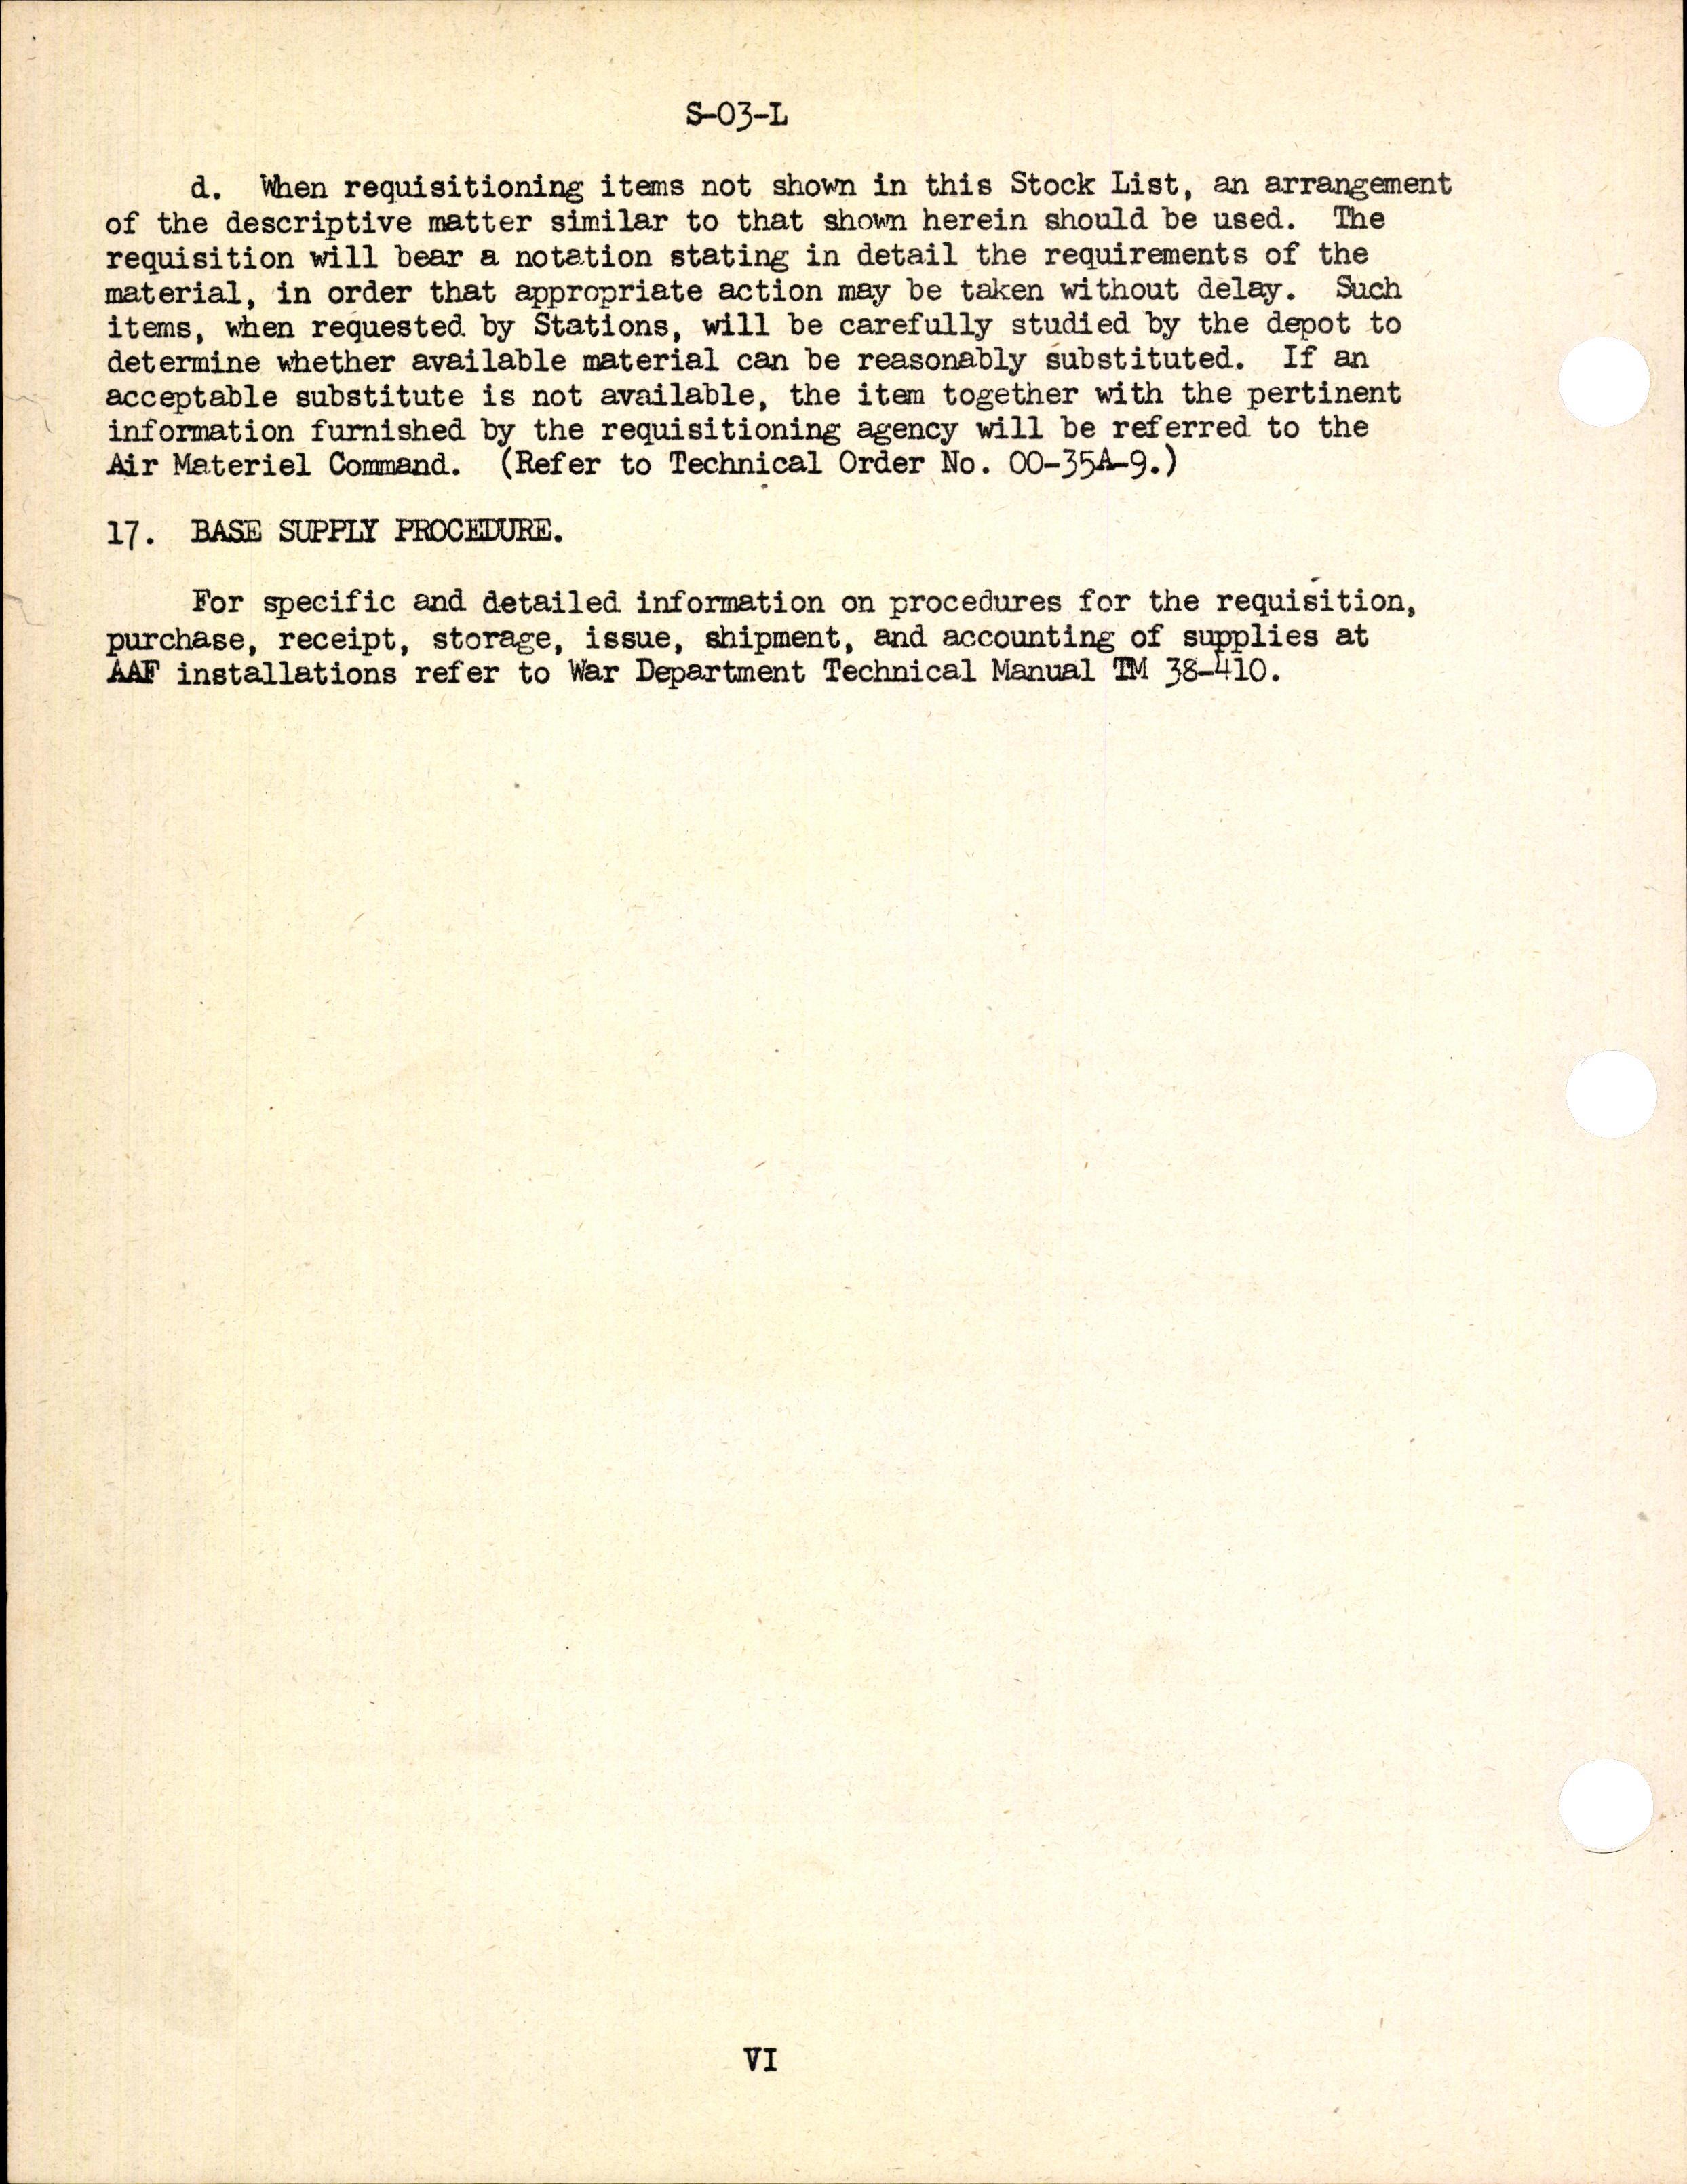 Sample page 8 from AirCorps Library document: Stock List for Aircraft Auxiliary Fuel Tanks